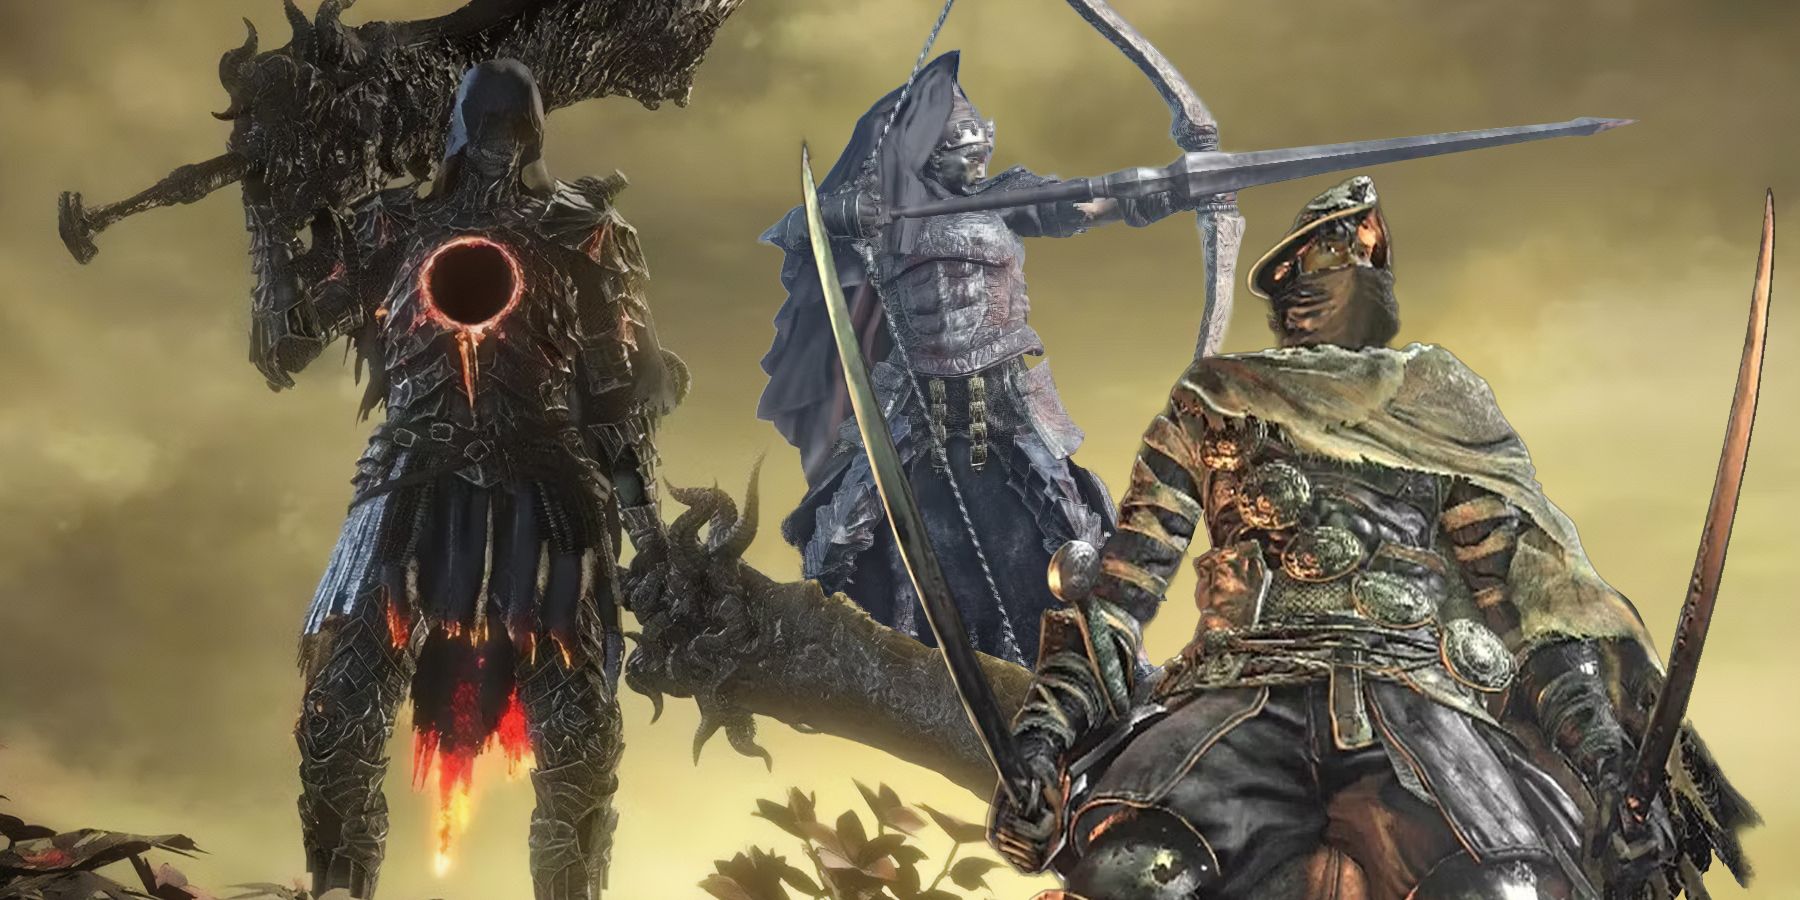 Best Dark Souls 3 Weapons That Make The Game Easy